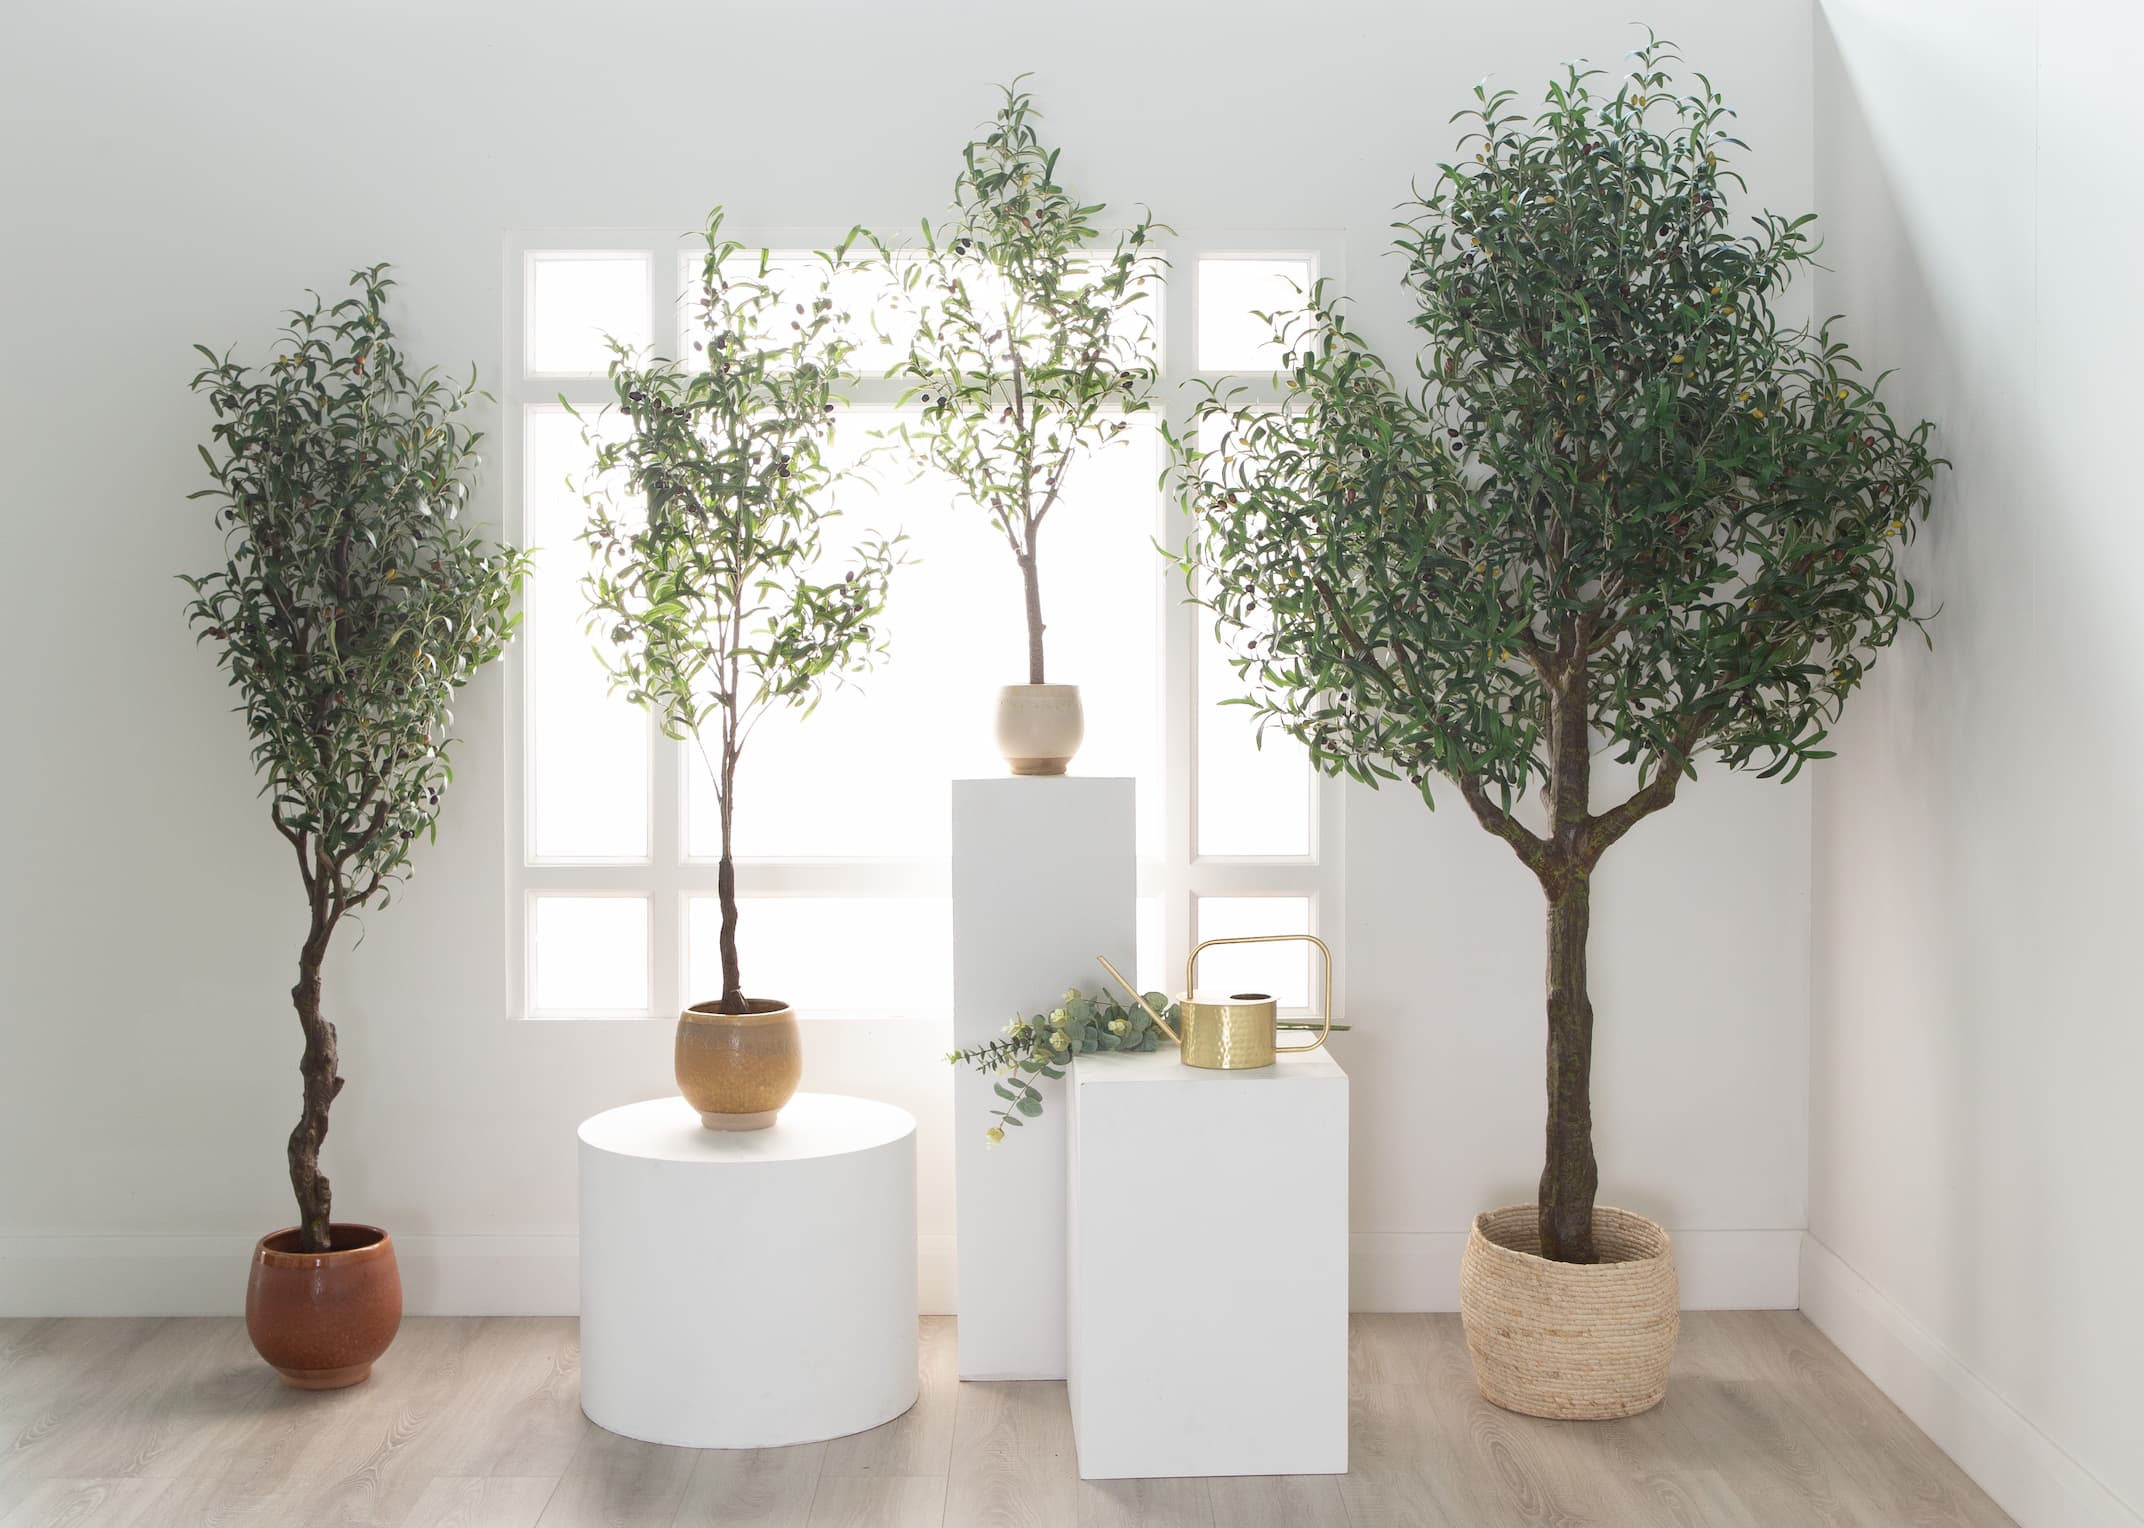 Artificial Olive Tree,4ft Small Faux Olive Tree, 48'' Fake Olive Tree  Artificial Plant Indoor, Home Decor,Fake Potted Tree for Home Living Room  Decor